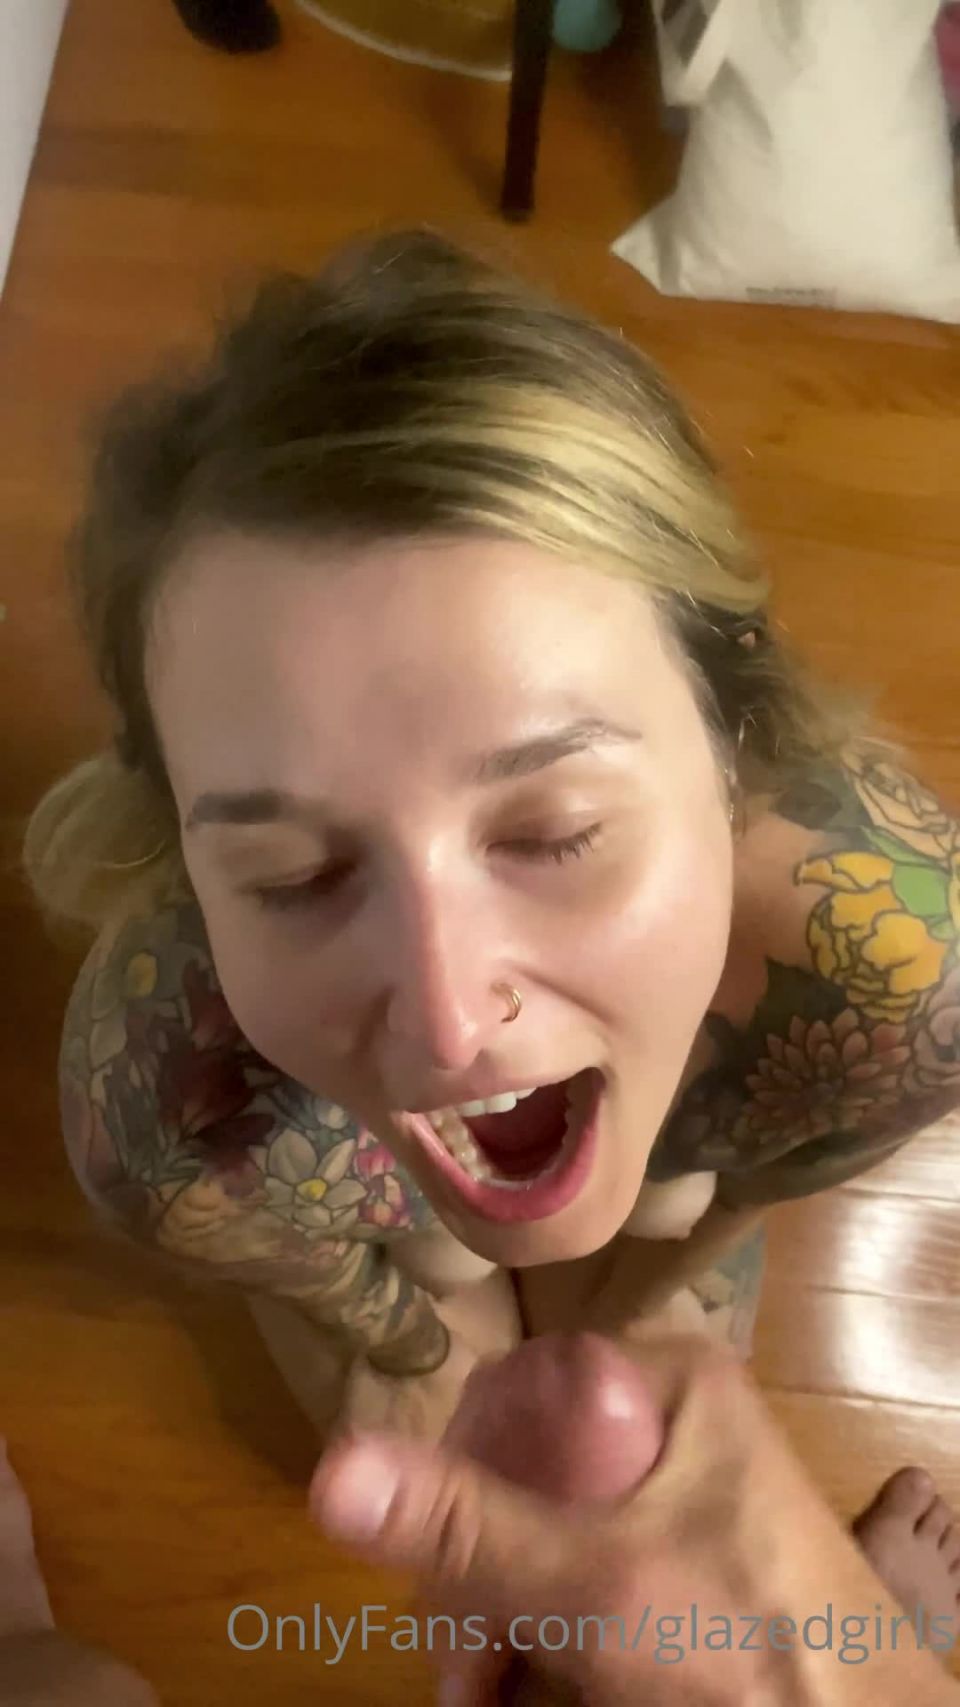 Onlyfans - Glazedgirls - sbdolphin gives good head and takes good cum  write that i sent you  couple account - 23-11-2021